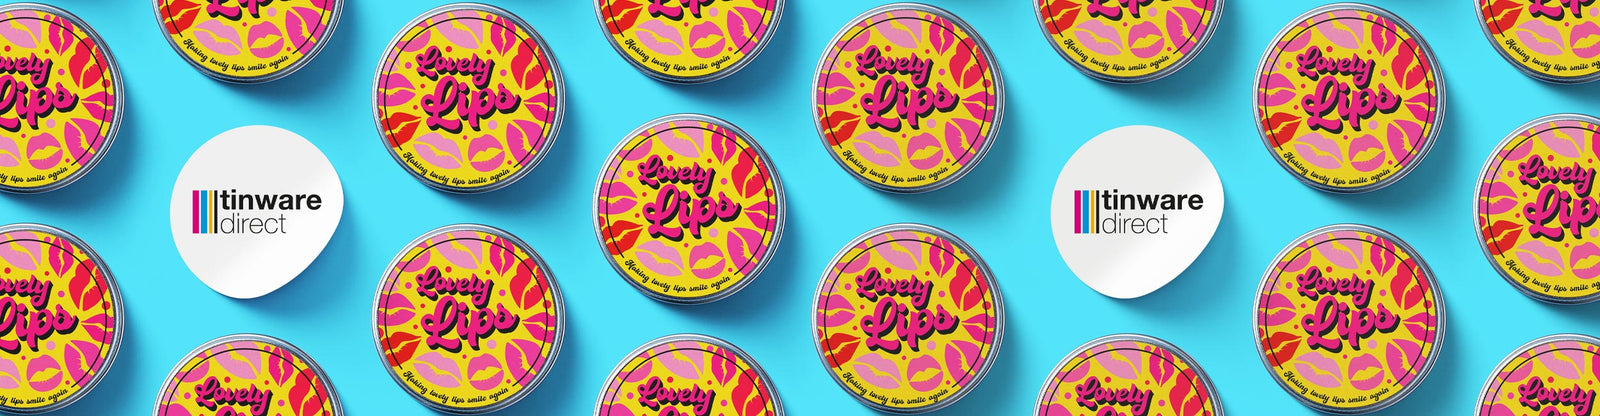 Lots of bright labelled lip balm tins.